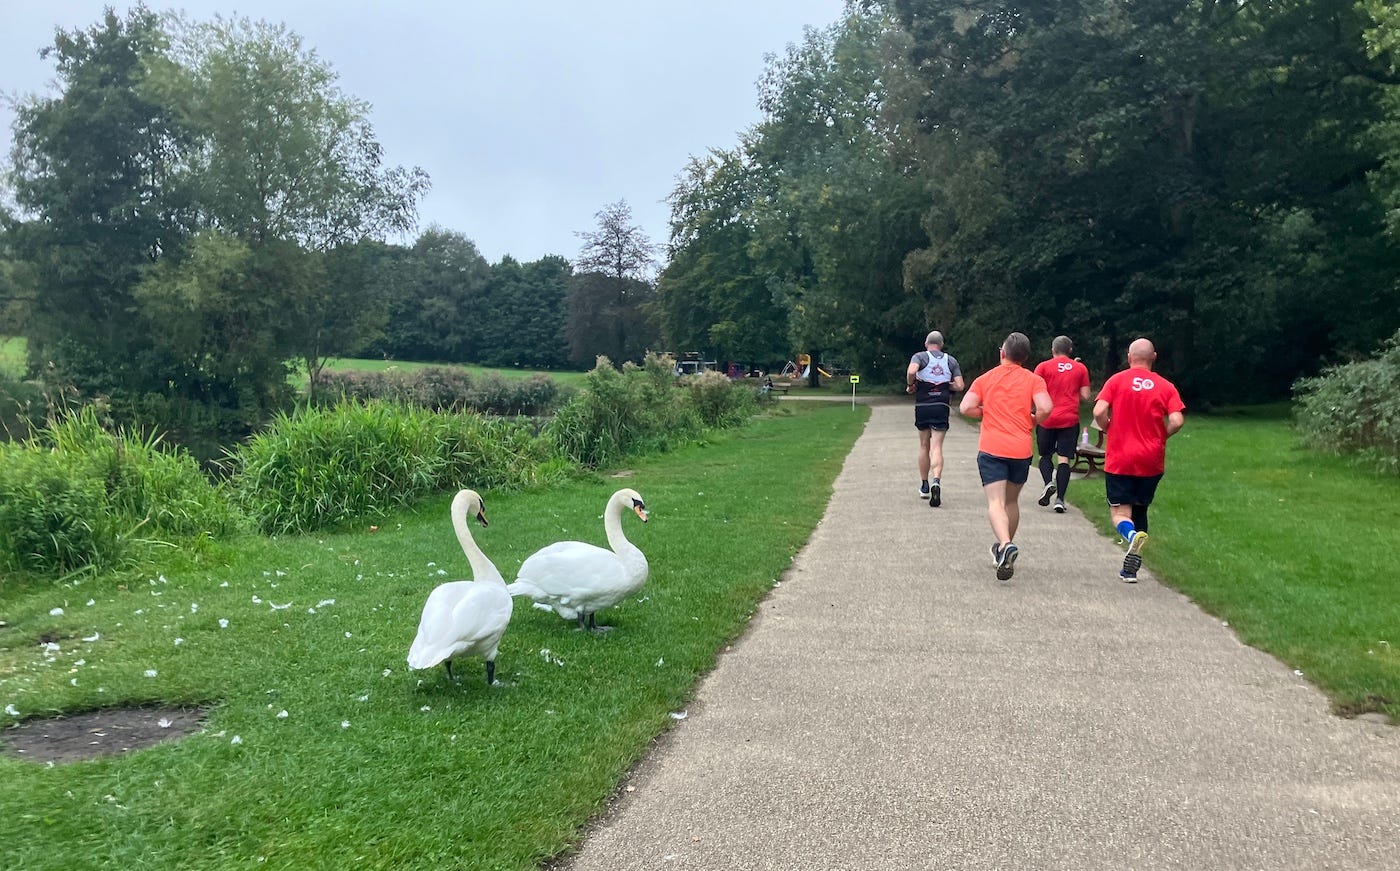 Two swans next to the path appear to be watching on as runners pass